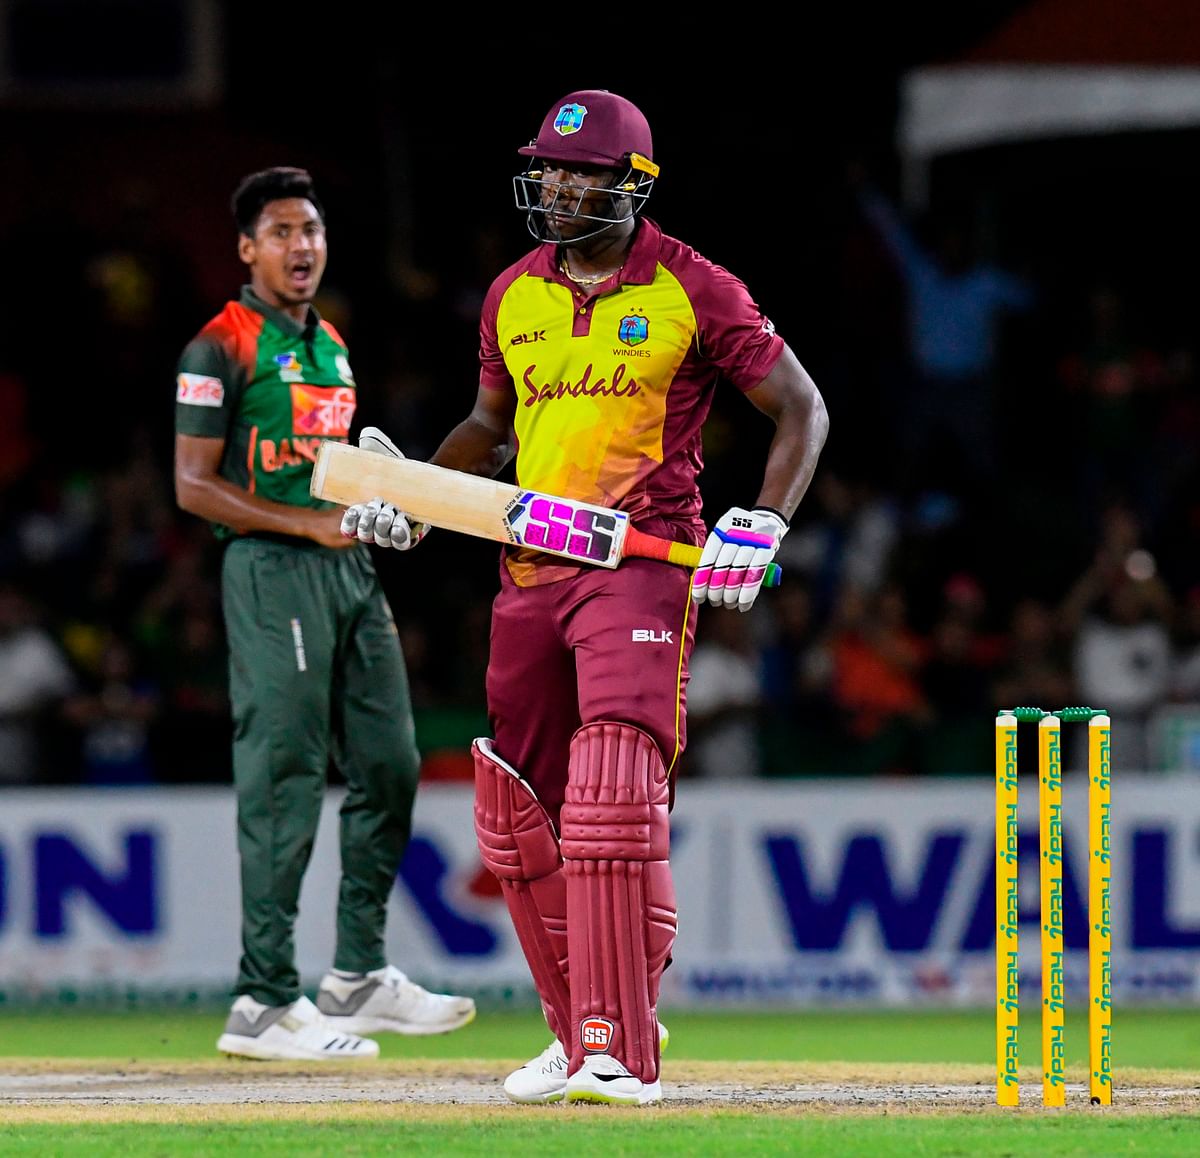 Andre Russell (R) of West Indies is dismissed by Mustafizur Rahman (L) of Bangladesh during the 2nd T20I match between West Indies and Bangladesh at Central Broward Regional Park Stadium in Fort Lauderdale, Florida, on 4 August 2018. Photo: AFP